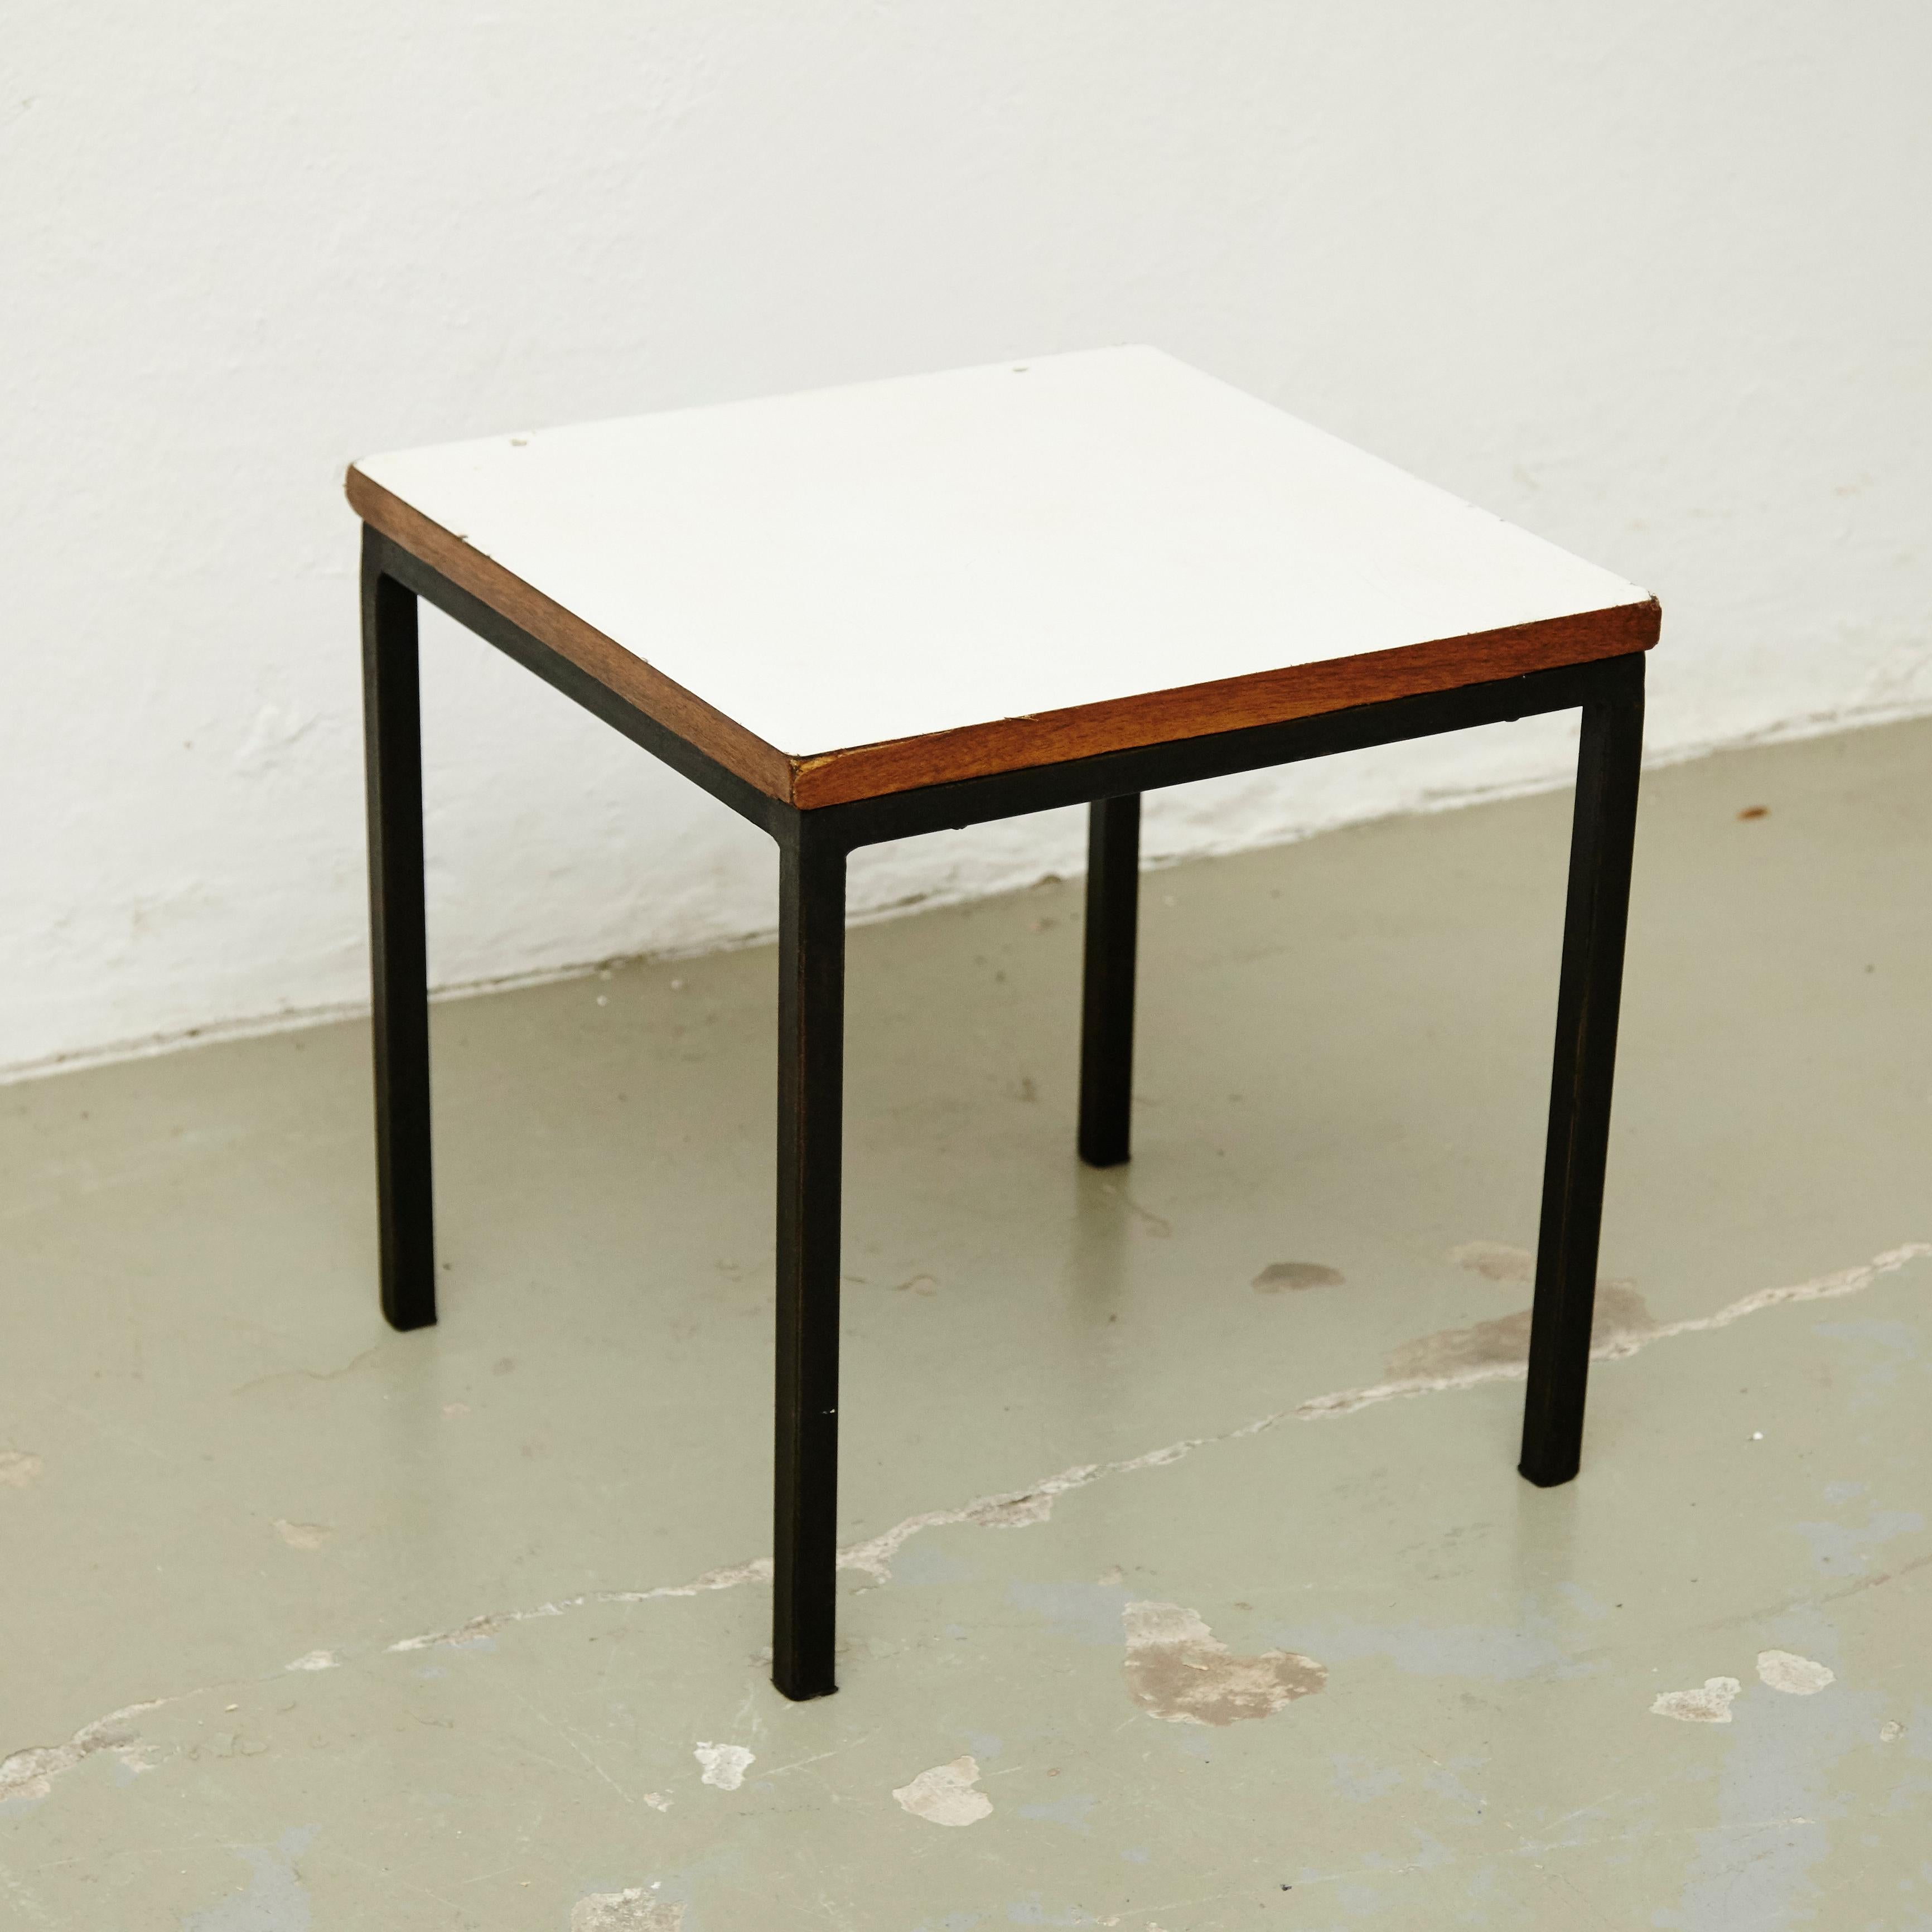 T-angle side table designed by Florence Knoll and manufactured by Knoll.
Metal legs and Formica tabletops. 

In good original condition, with minor wear consistent with age and use.

Florence Knoll Bassett is an American architect and furniture